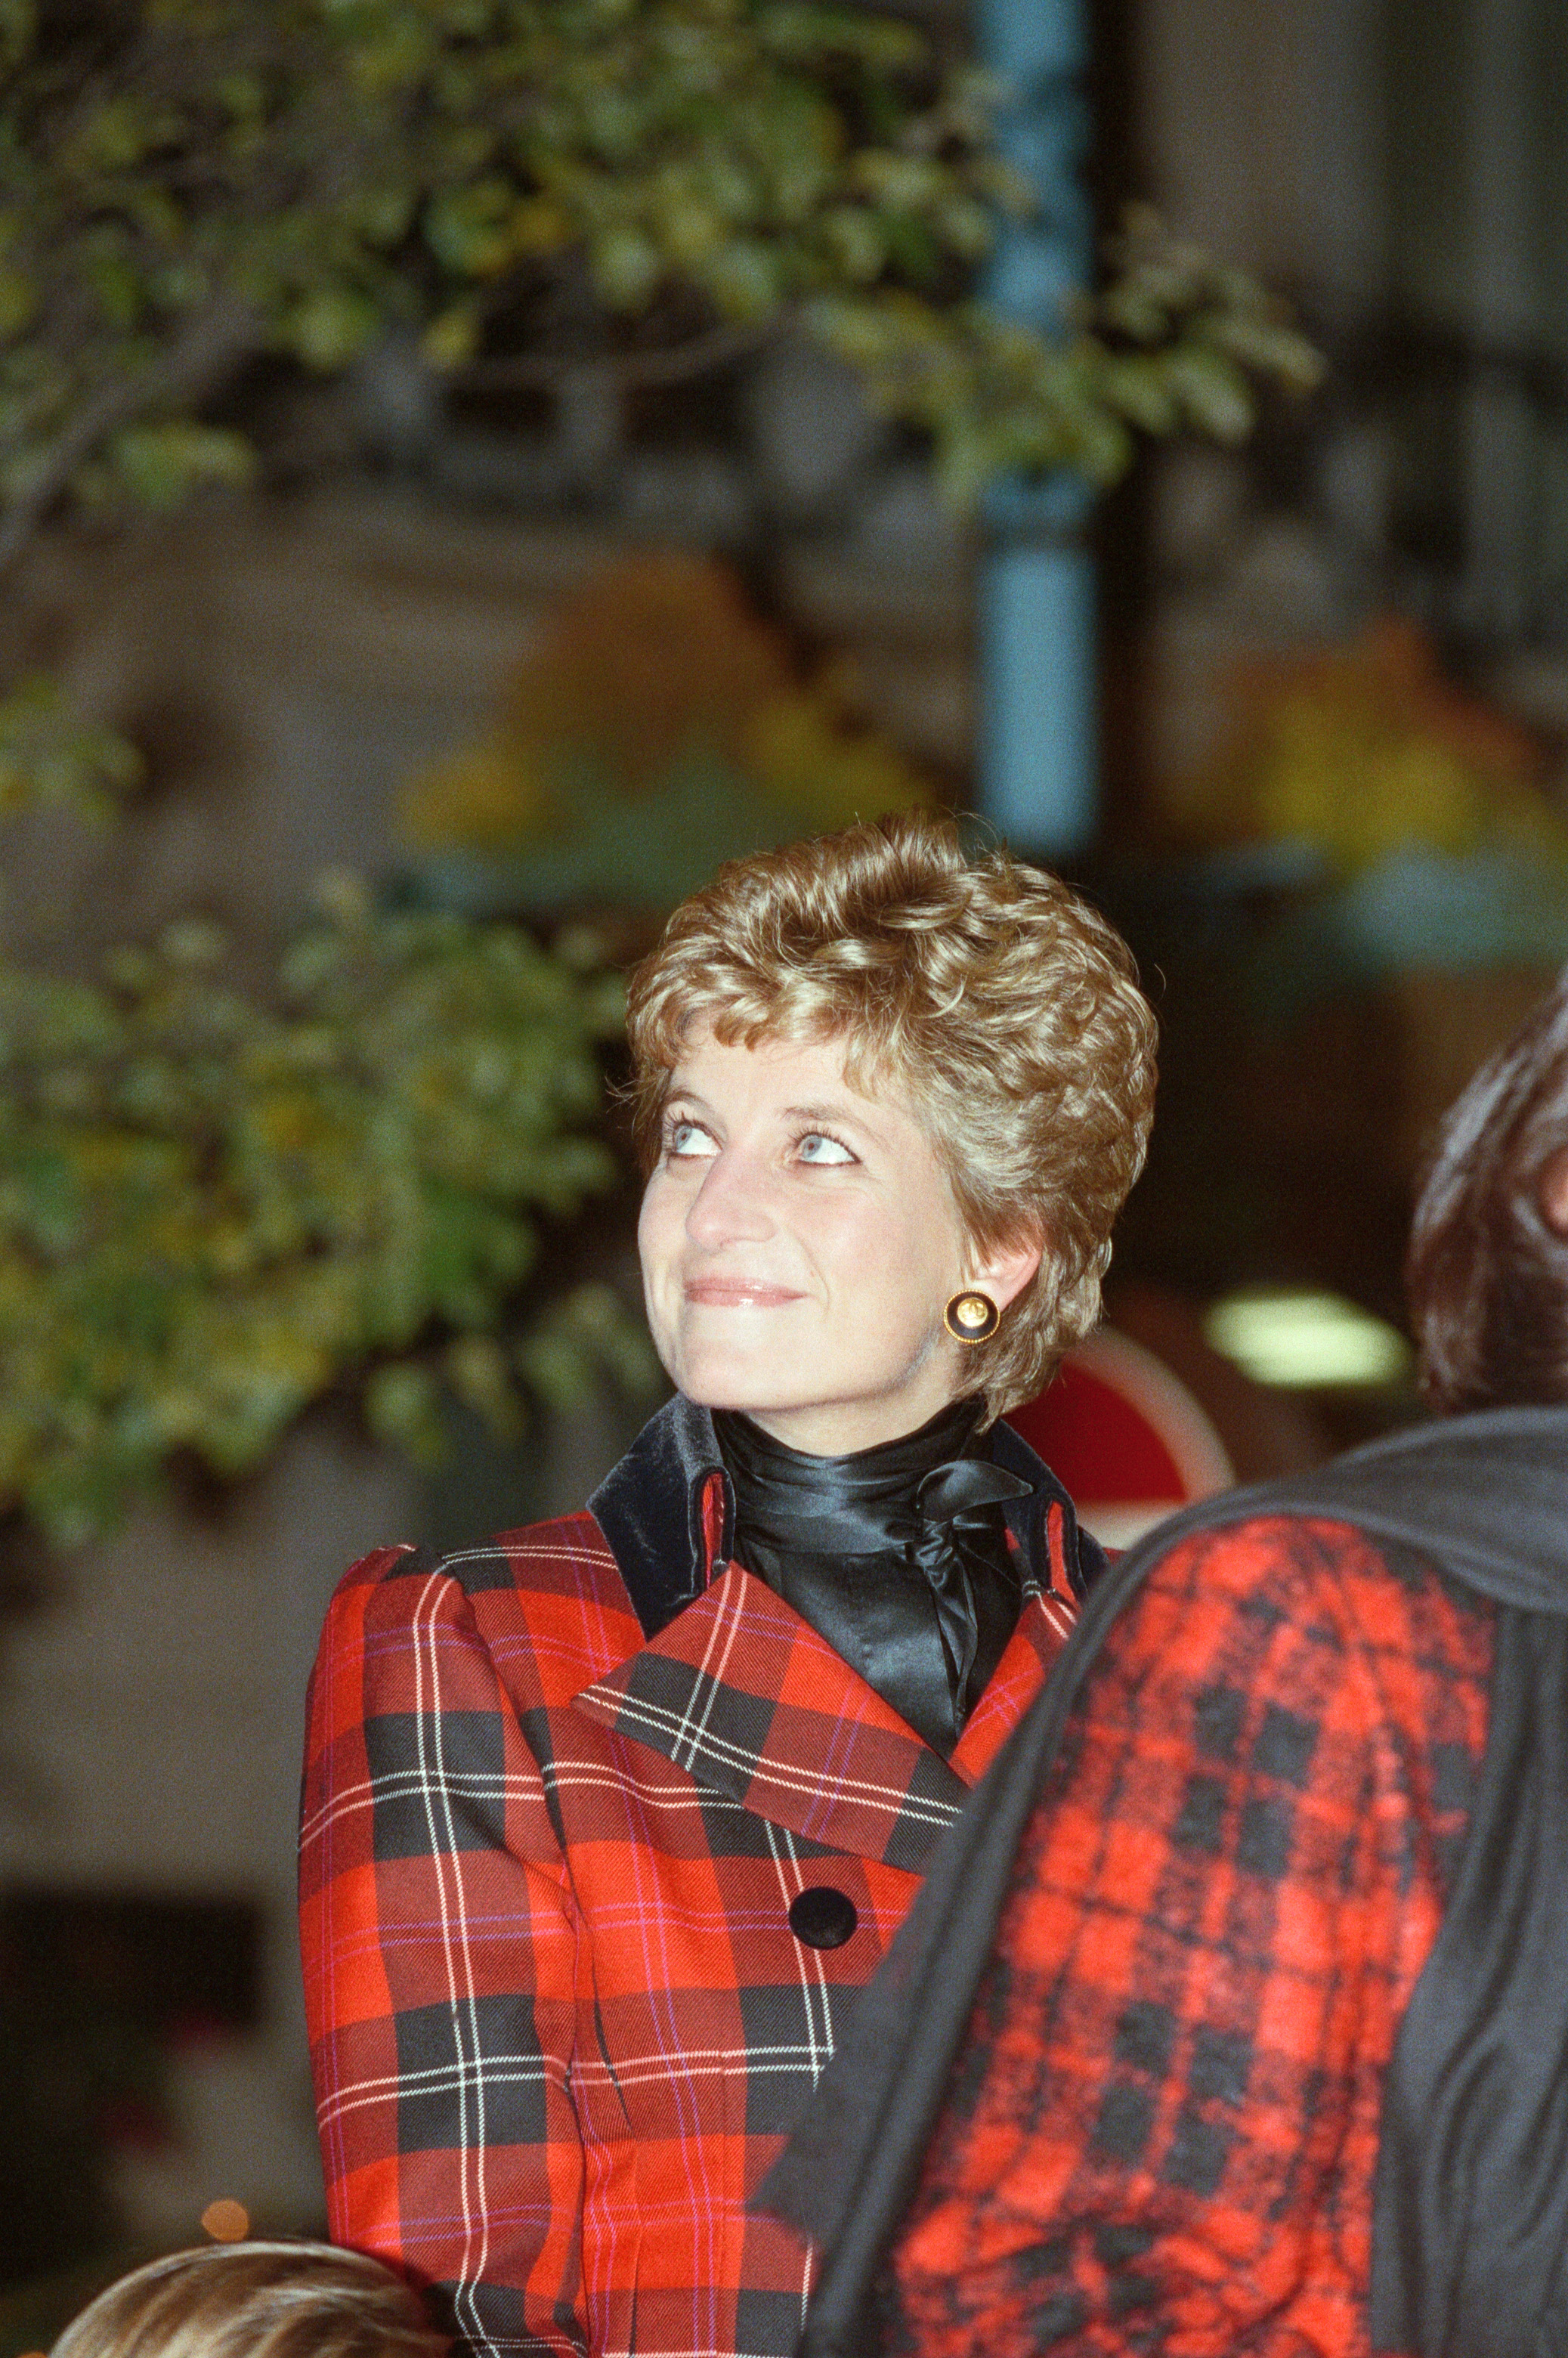 Princess Diana in a Christmas photo, looking up and smiling while she switches on Christmas lights